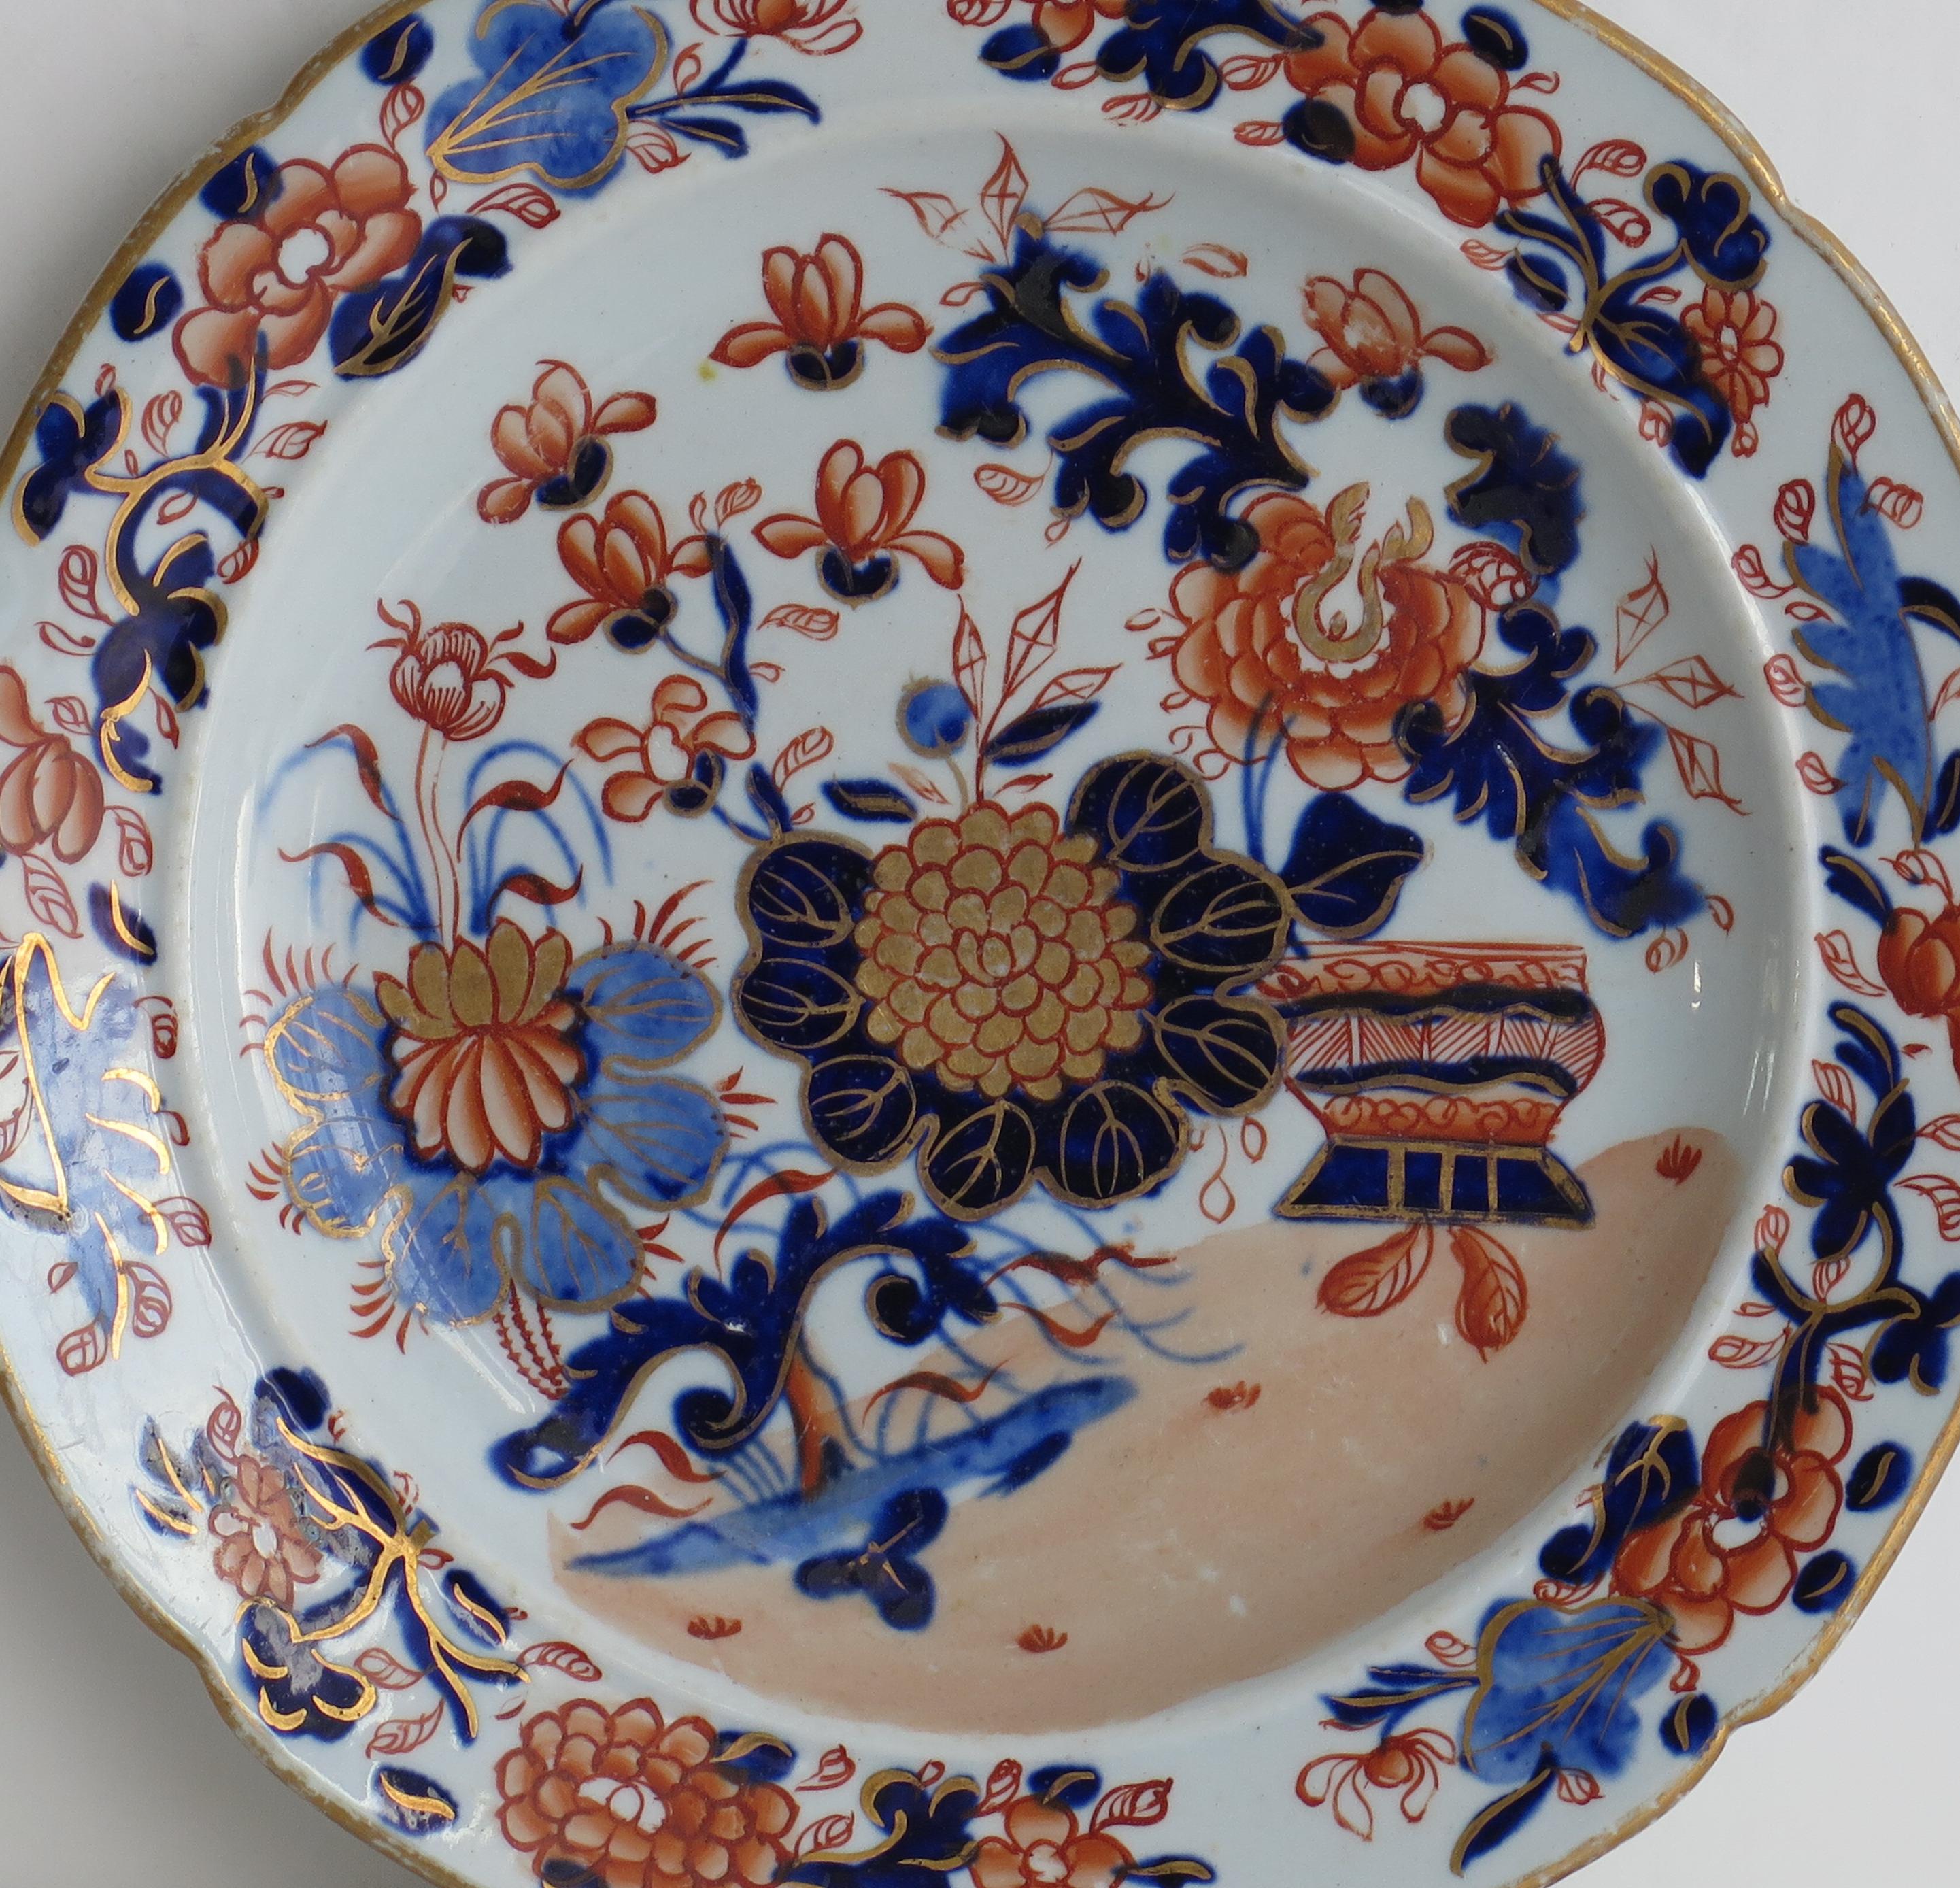 This is an early Mason's ironstone side plate hand finely hand painted in the very decorative Basket Japan gilded pattern, produced by the Mason's factory at Lane Delph, Staffordshire, England, circa 1813-1820.

The plate is circular with a